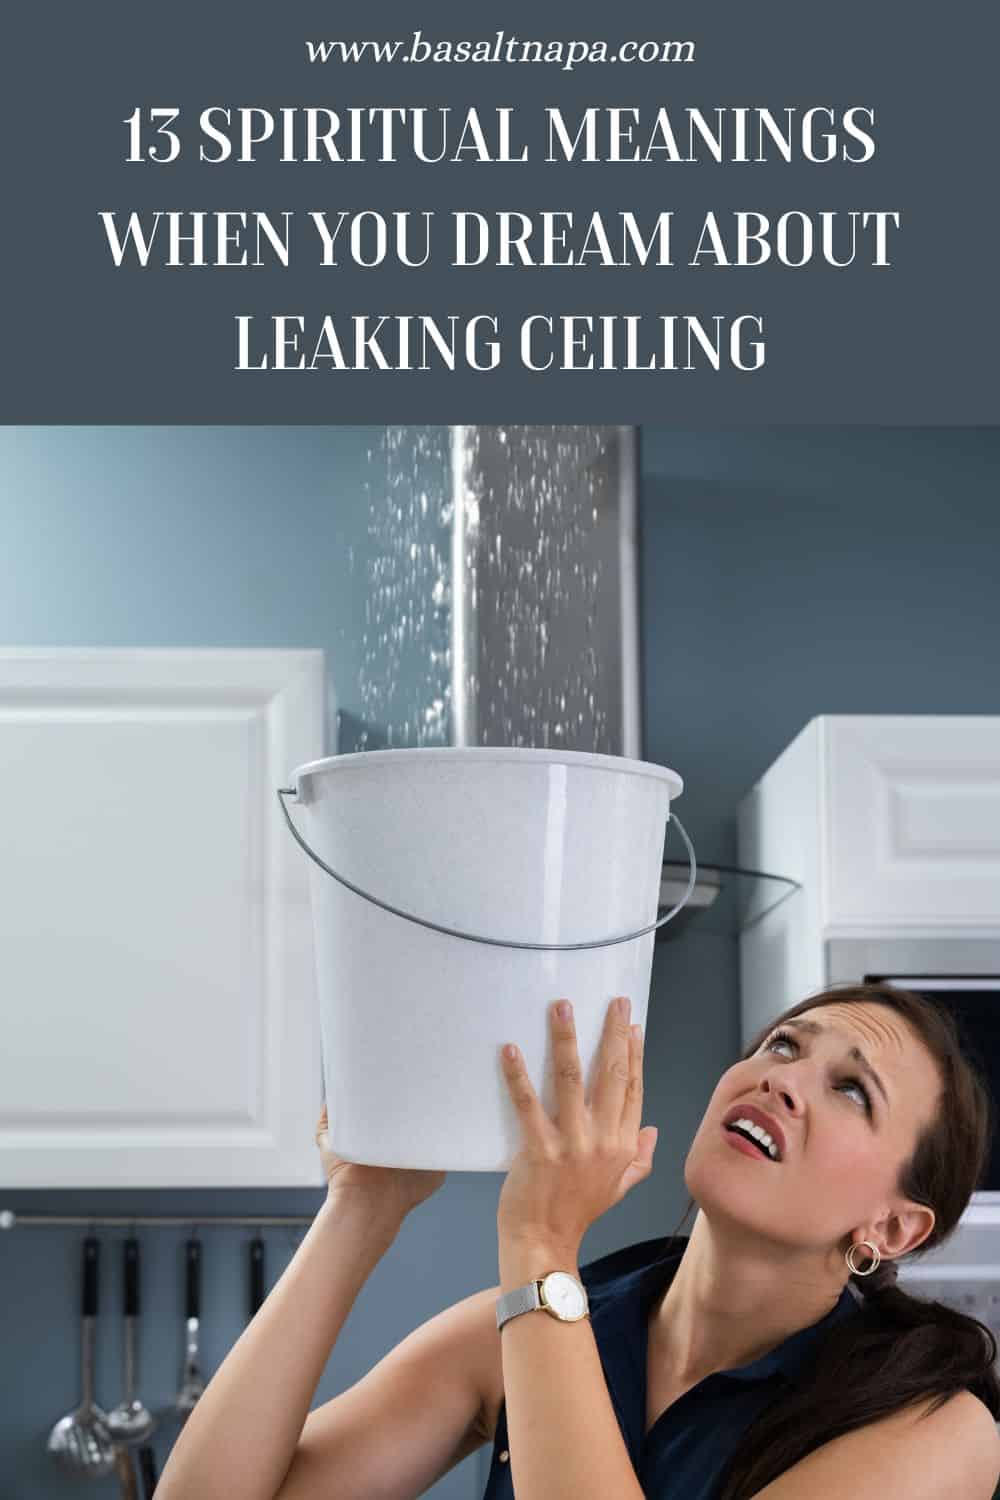 What Do Dreams about Leaking Ceilings Symbolize?